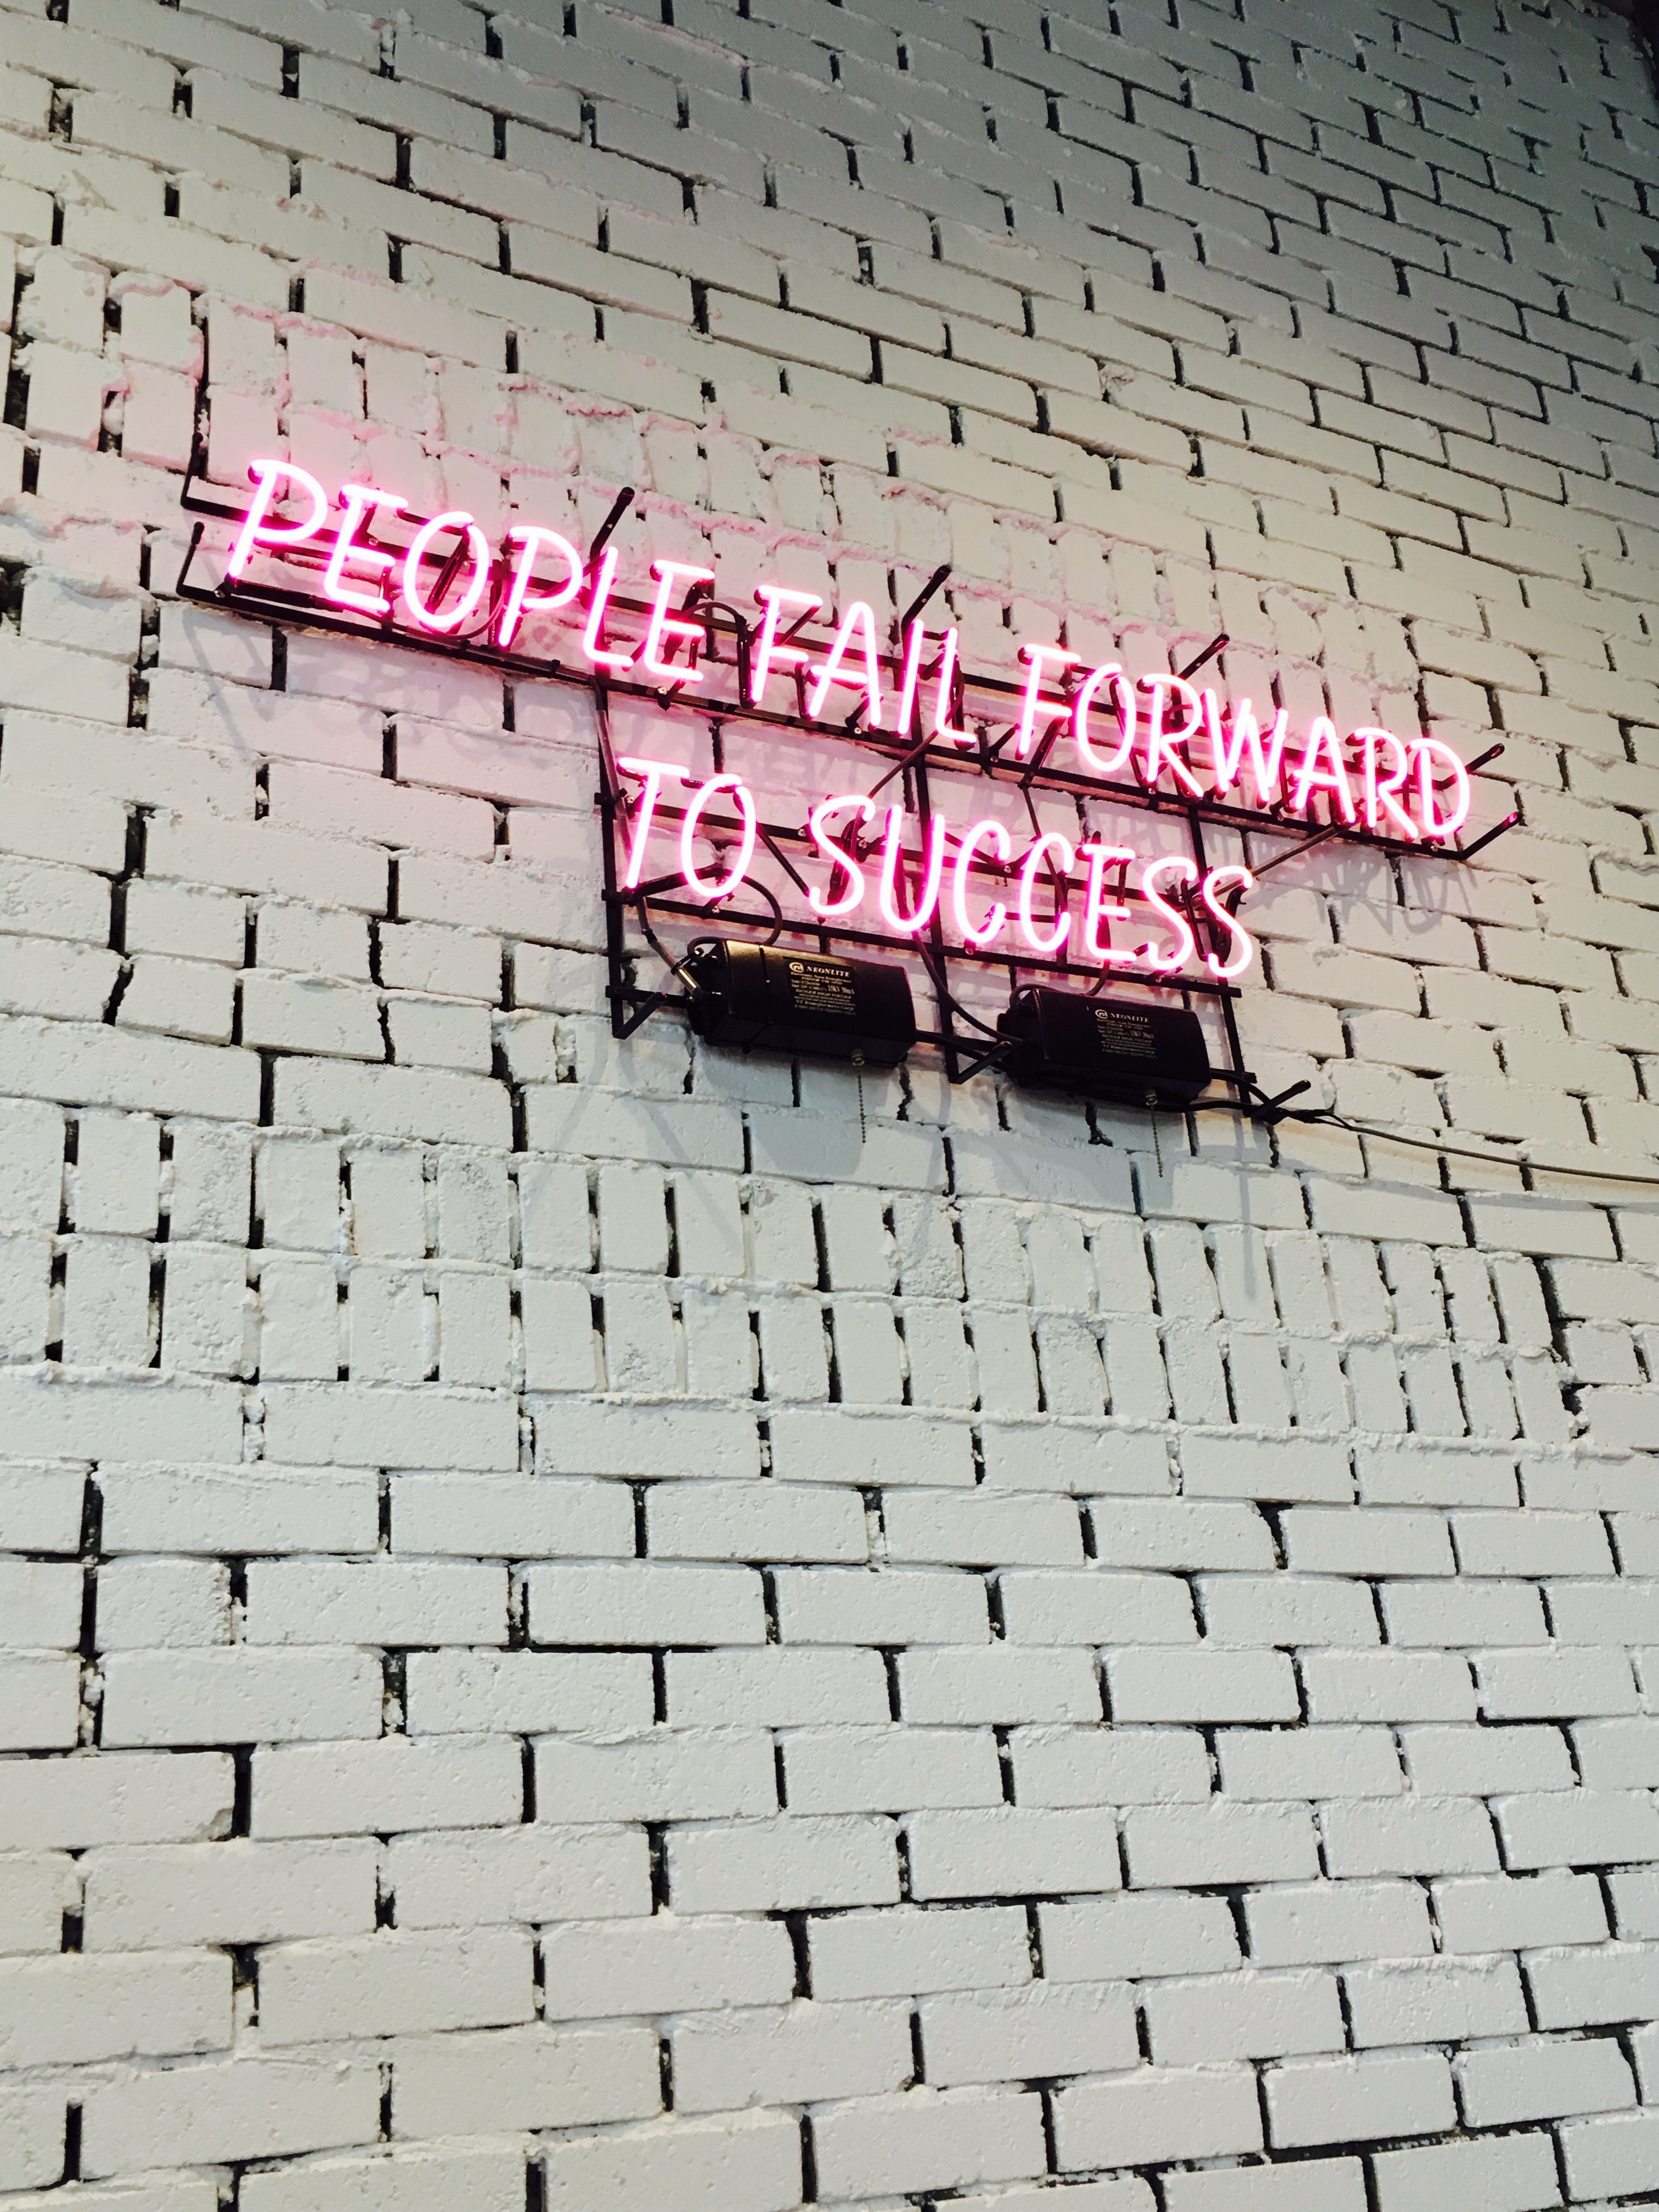 A neon sign with encouraging words about failure